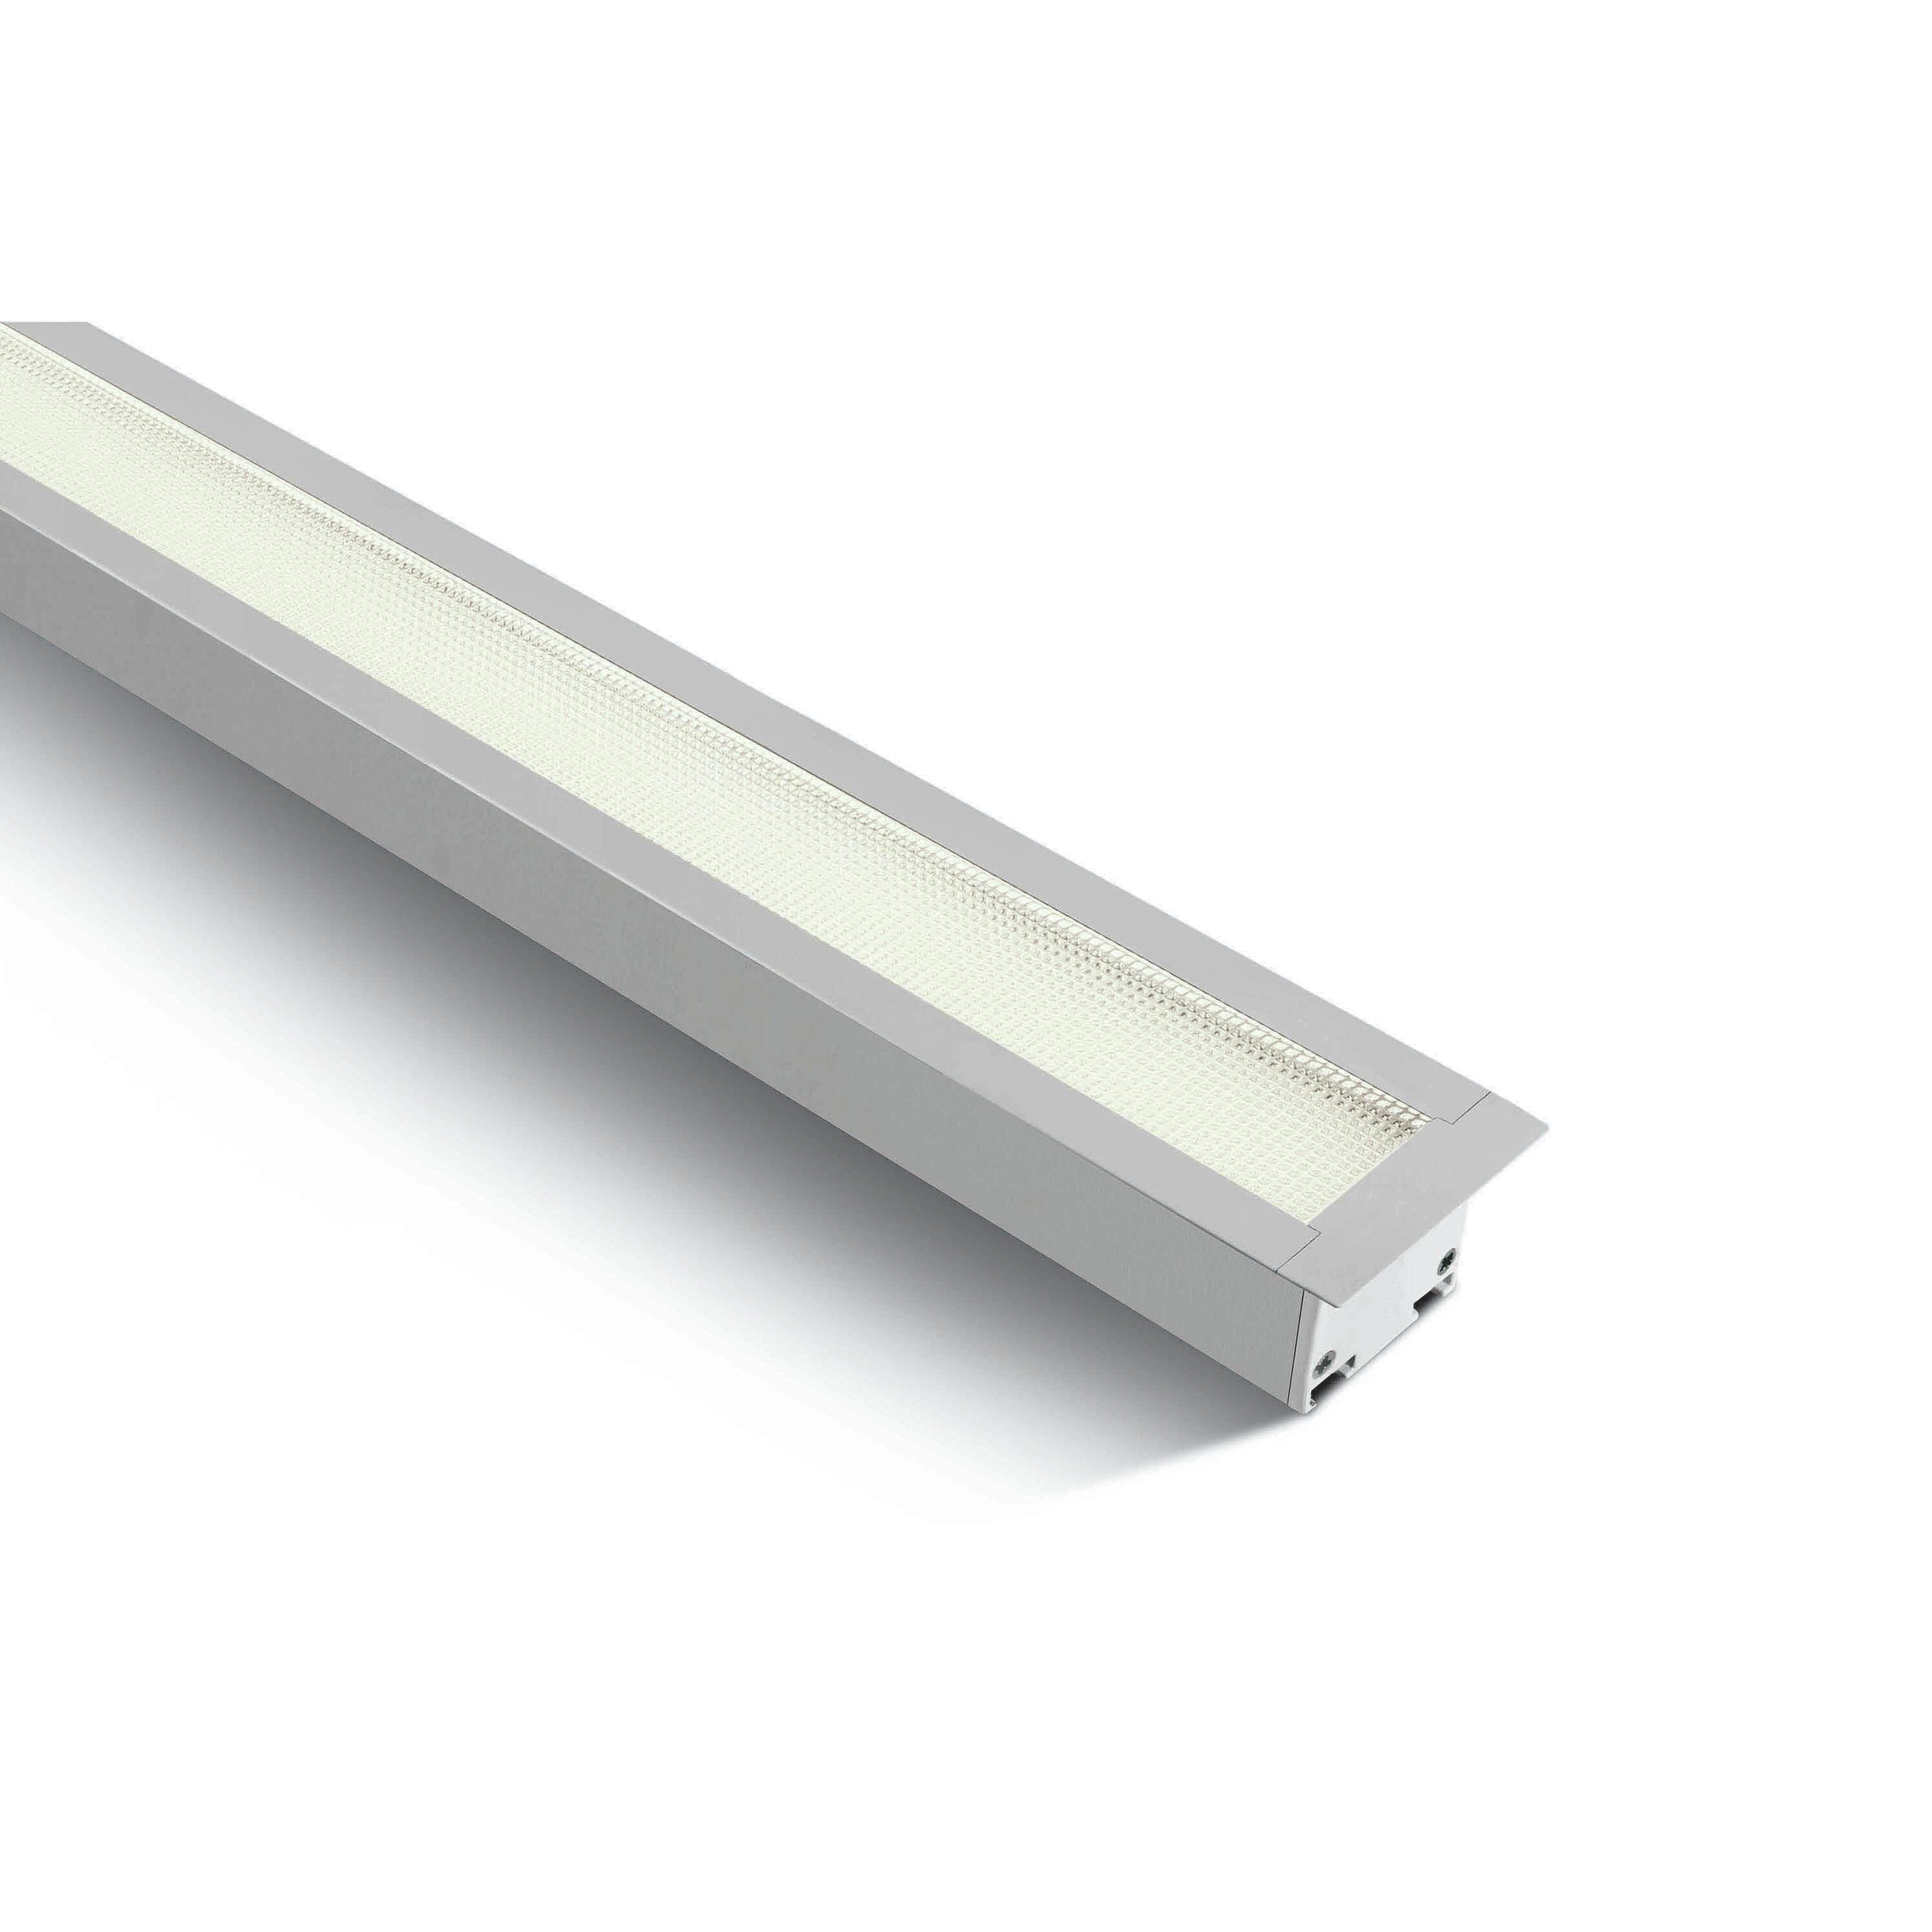 US dollar Panorama ozon ONE Light UGR19 Recessed LED Linear Profiles - inbouw plafondverlichting -  121 x 5 x 5,5 cm - 40W LED incl. - wit - witte lichtkleur | Lichtkoning